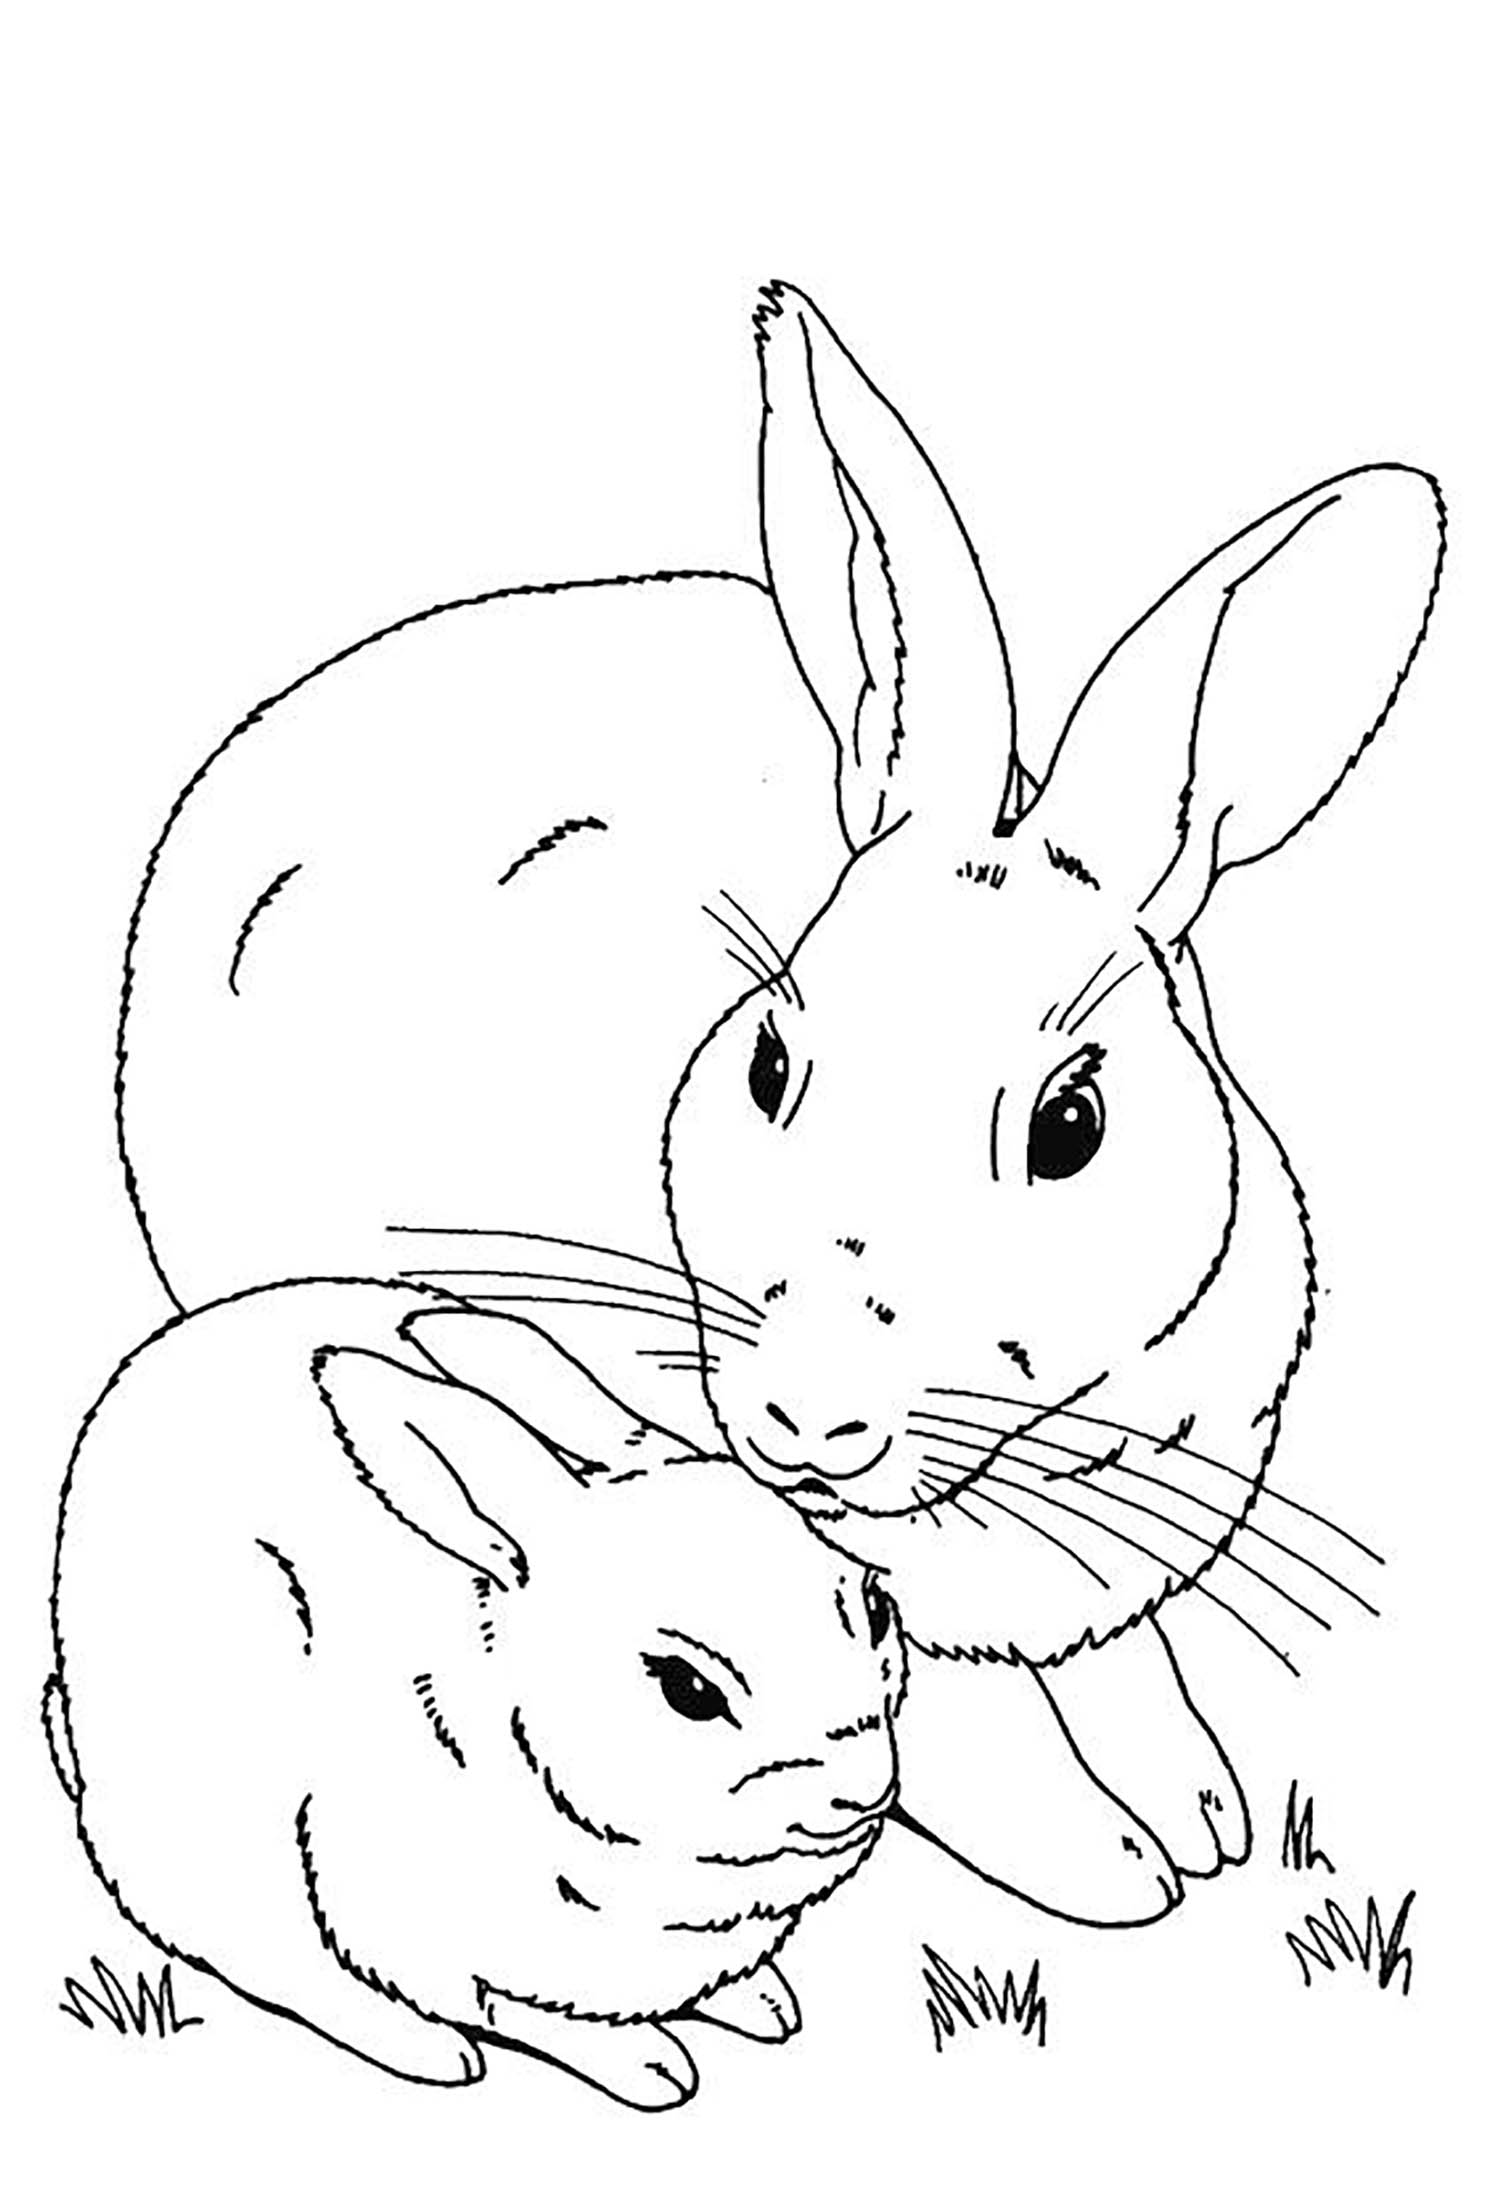 Image of a rabbit & a bunny to download and print for children